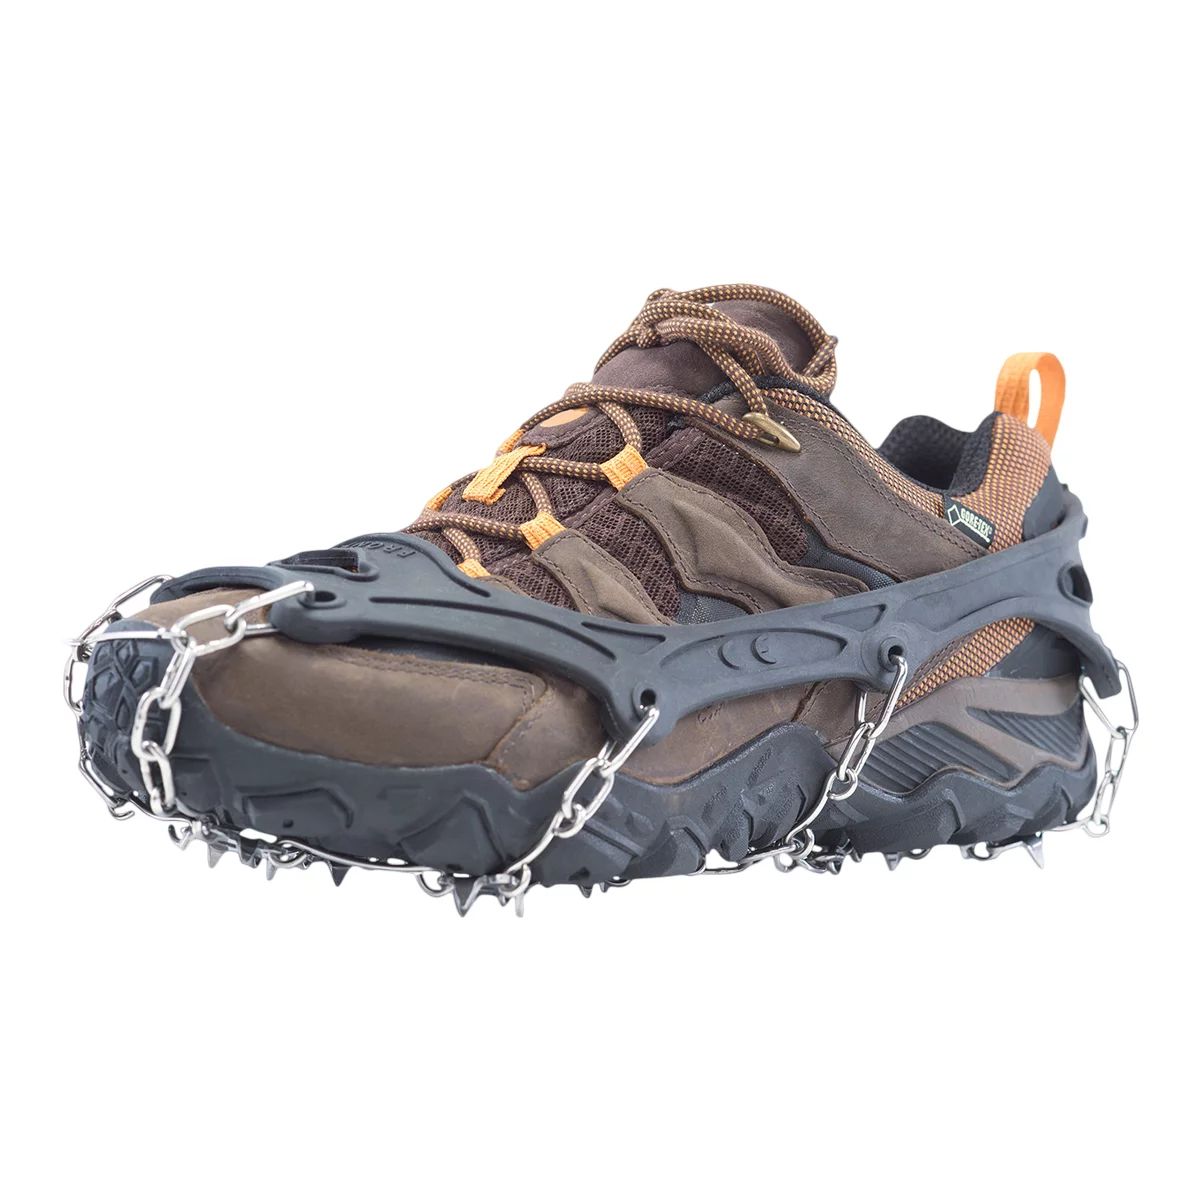 Image of Hillsound FreeSteps6 Traction Crampon